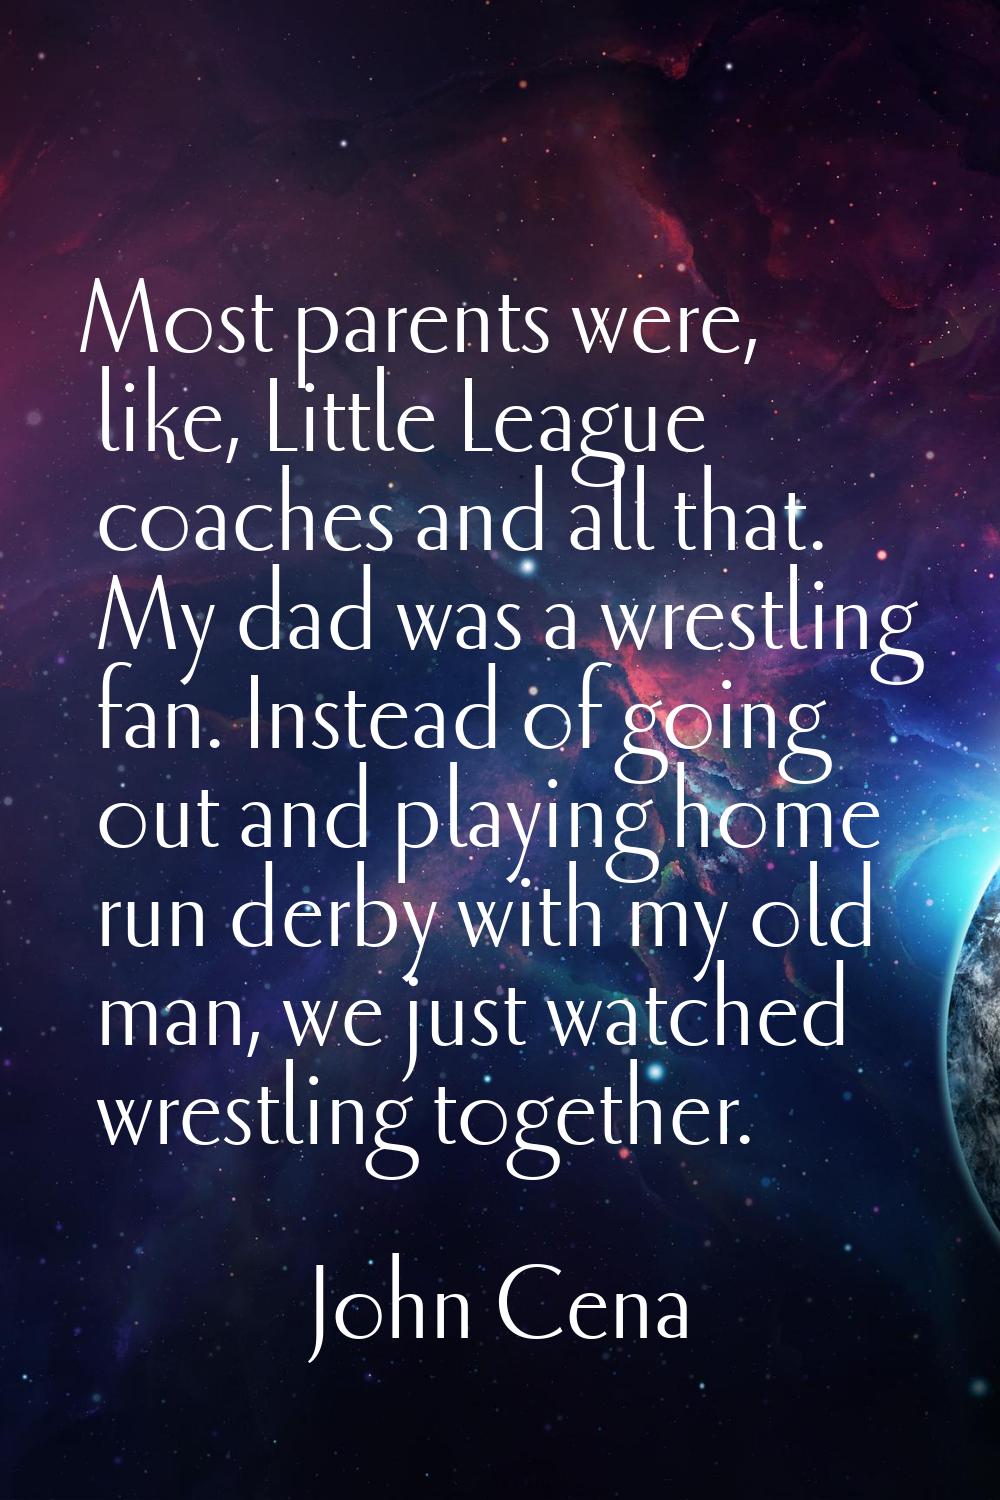 Most parents were, like, Little League coaches and all that. My dad was a wrestling fan. Instead of